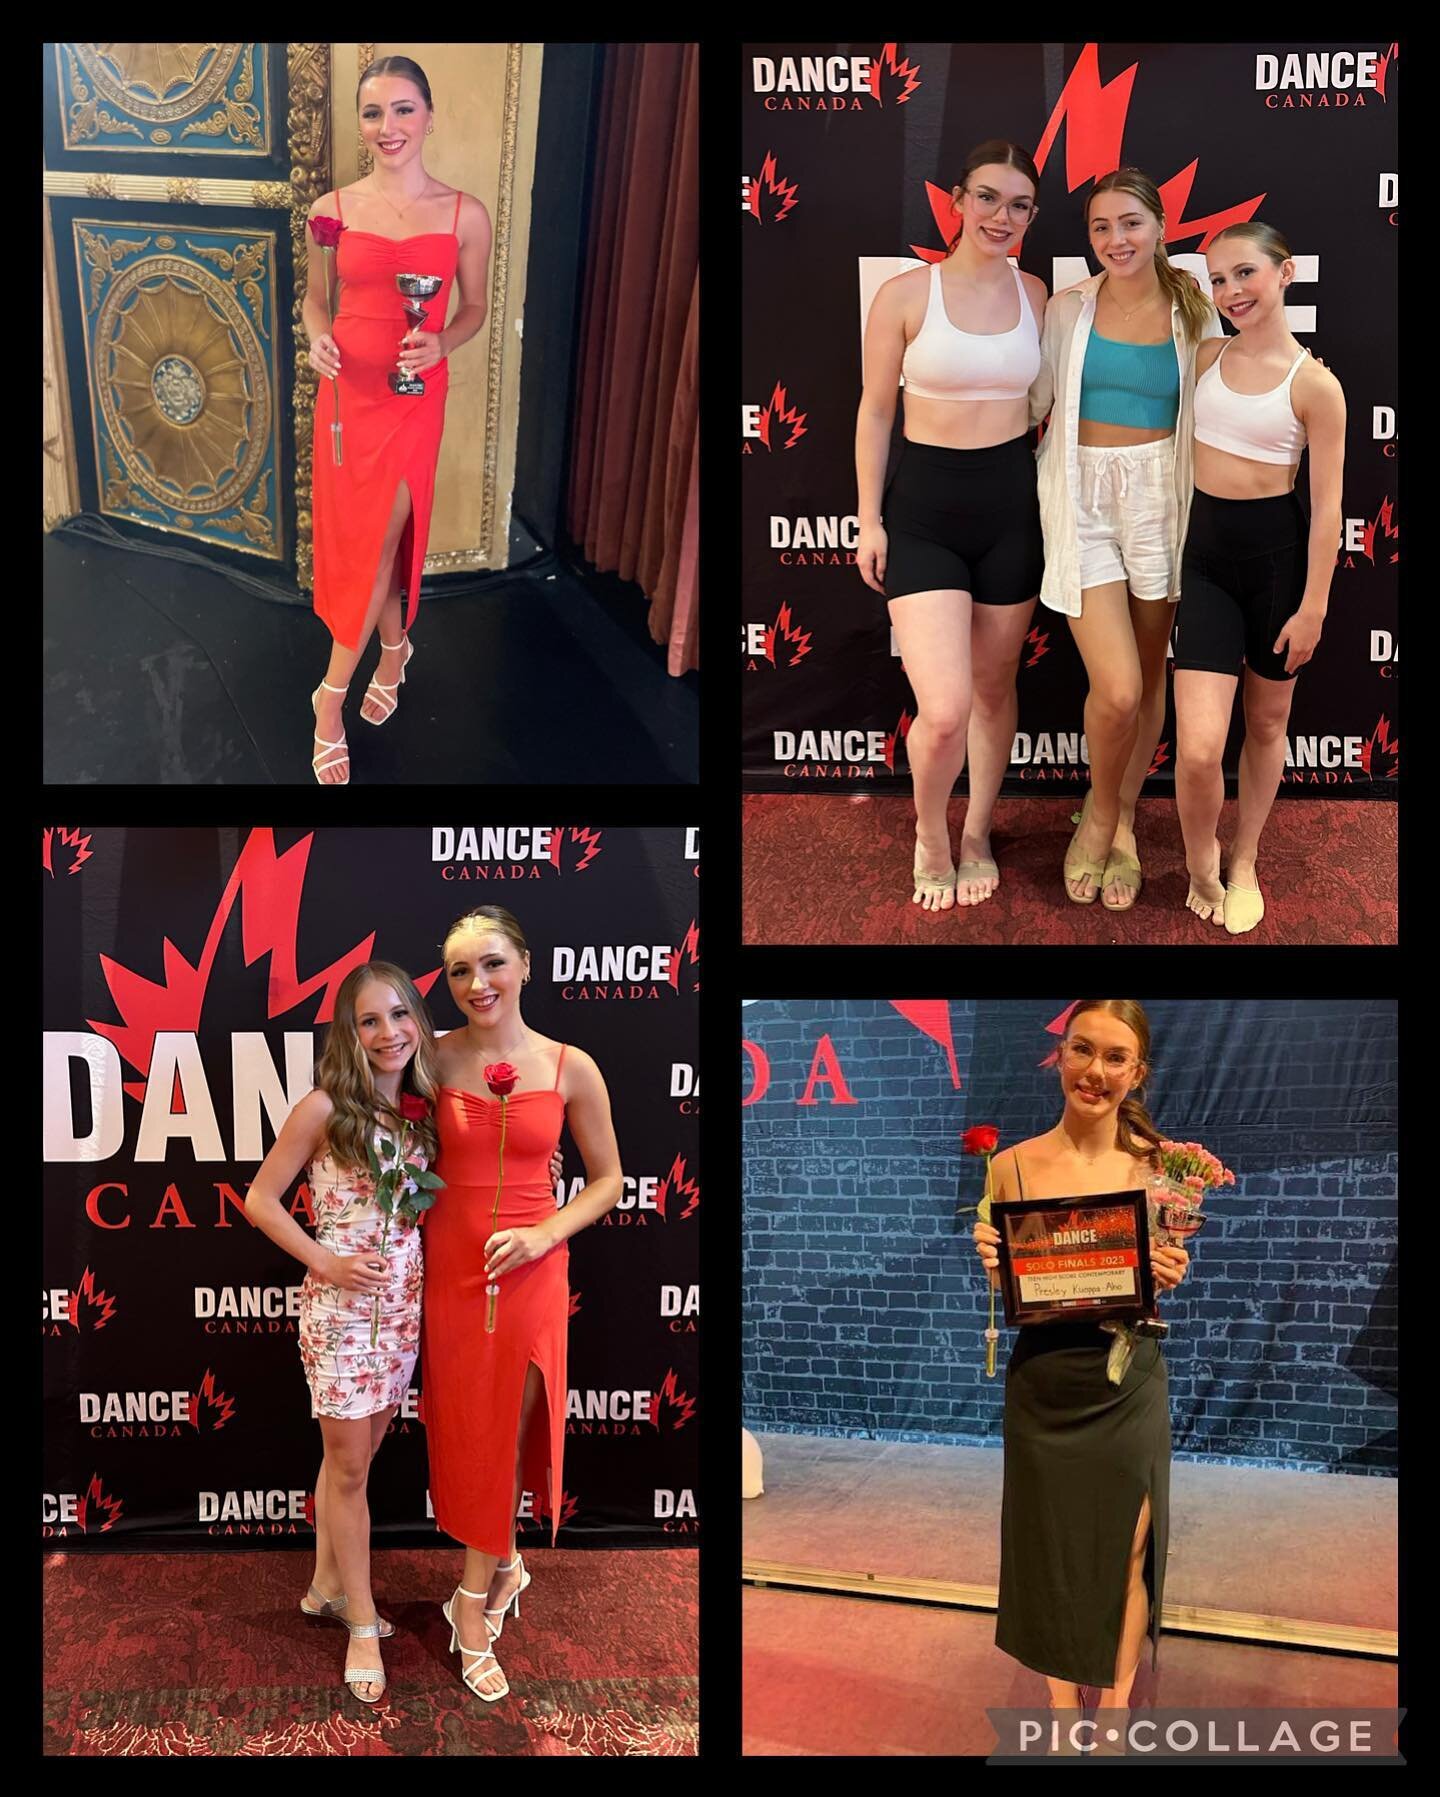 It&rsquo;s been quite a week for a few of our FGDC Dancers at Dance Canada Solo Finals in Brantford!
Congratulations to Addison, Presley &amp; Ella on their incredible week of dance where they took classes in ballet, tap, jazz, contemporary and hip-h